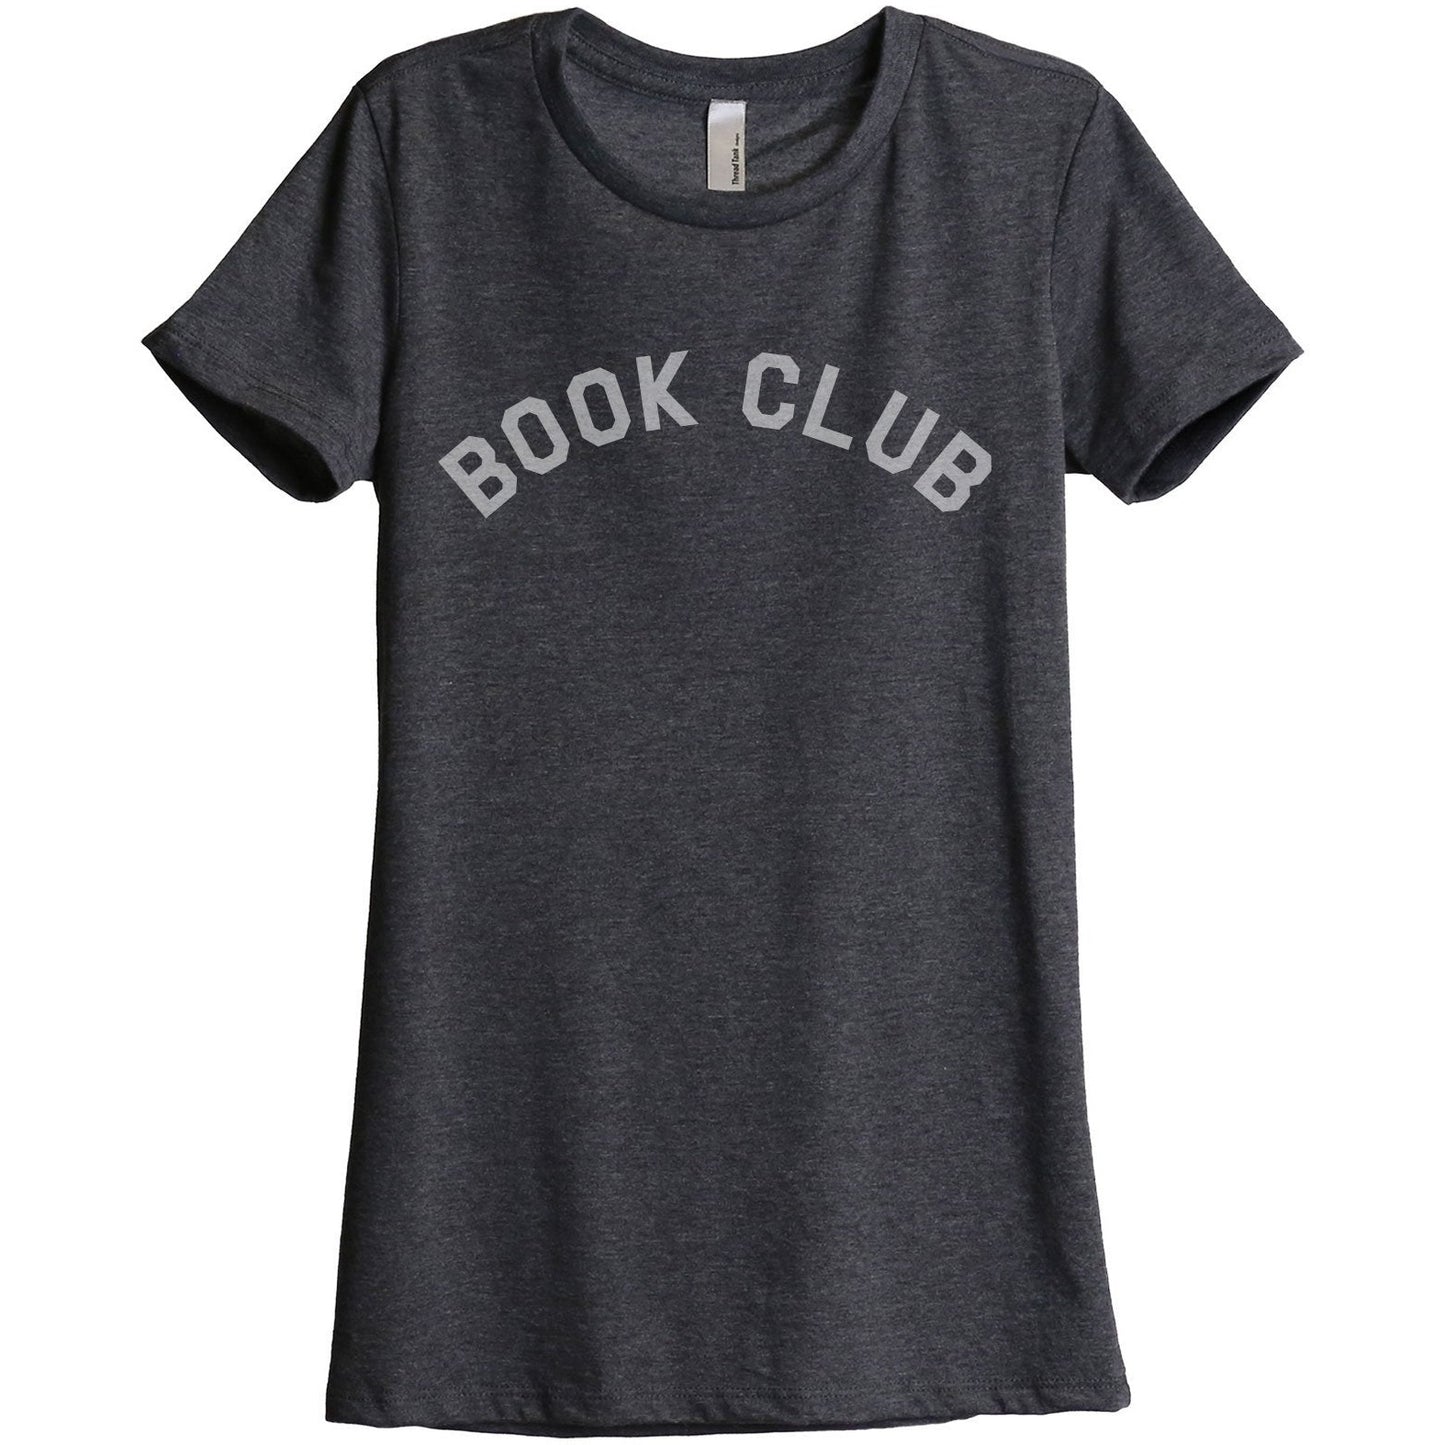 Book Club Women's Relaxed Crewneck T-Shirt Top Tee Charcoal Grey
